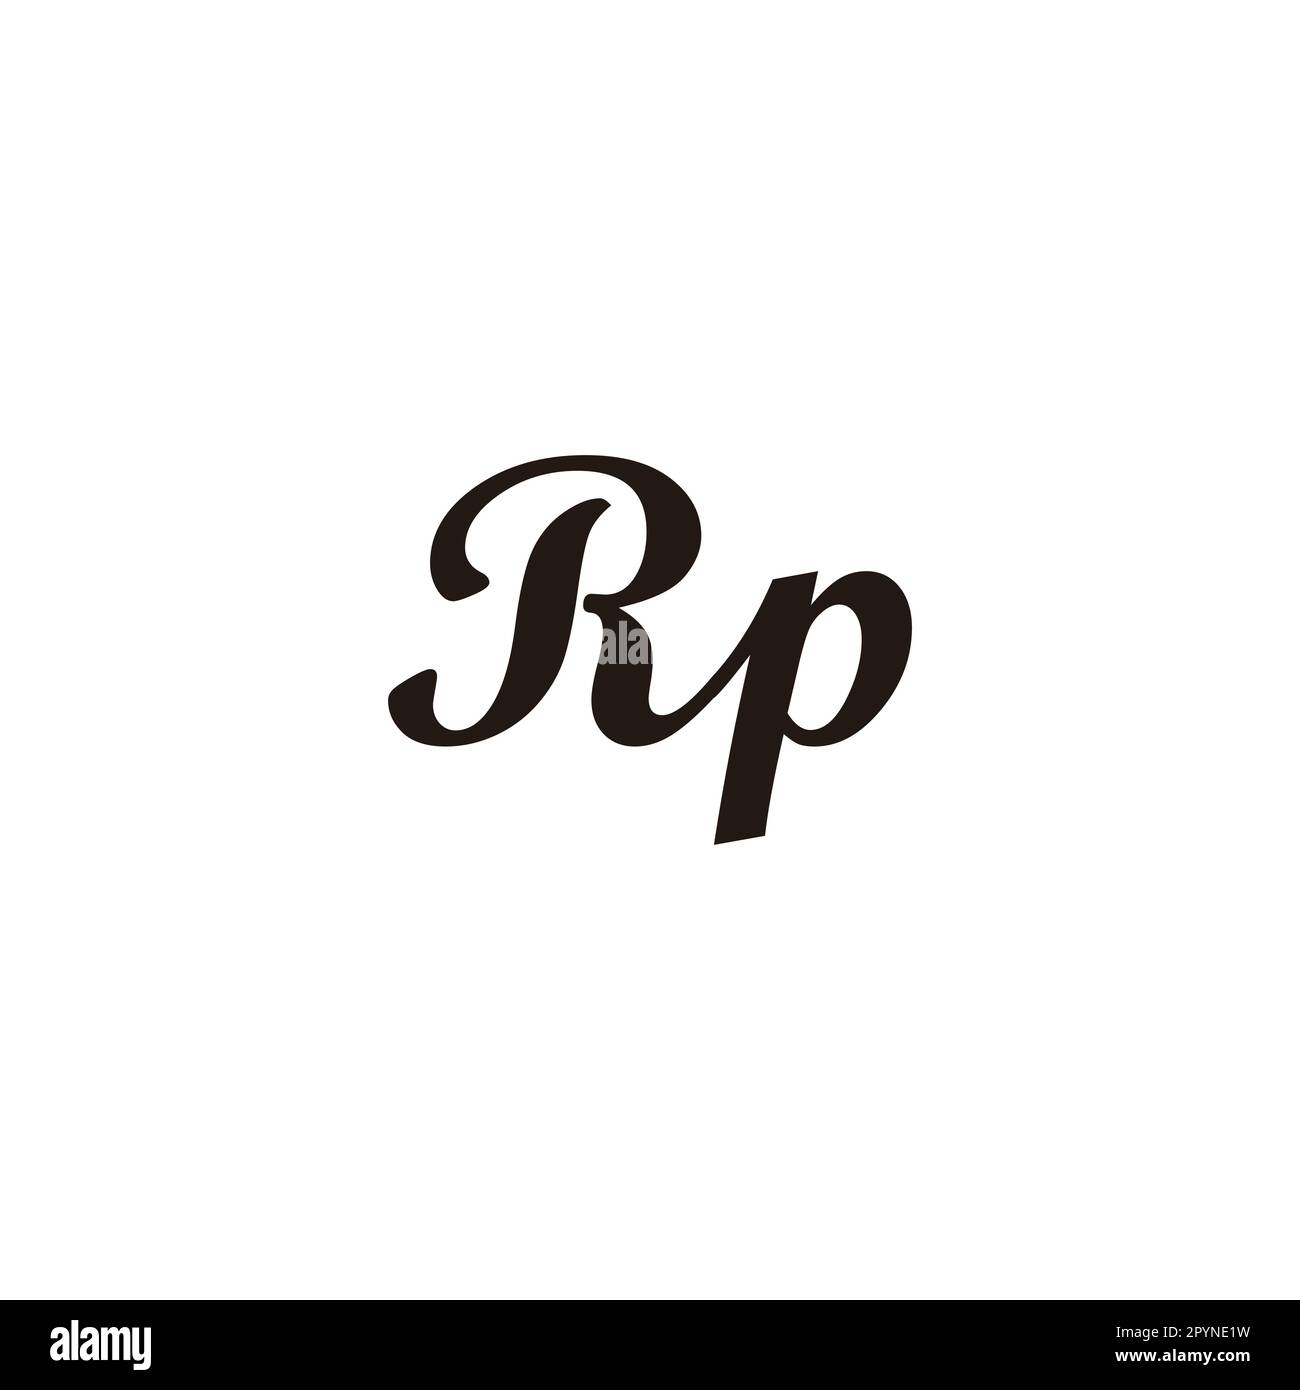 Letter Rp connect geometric symbol simple logo vector Stock Vector